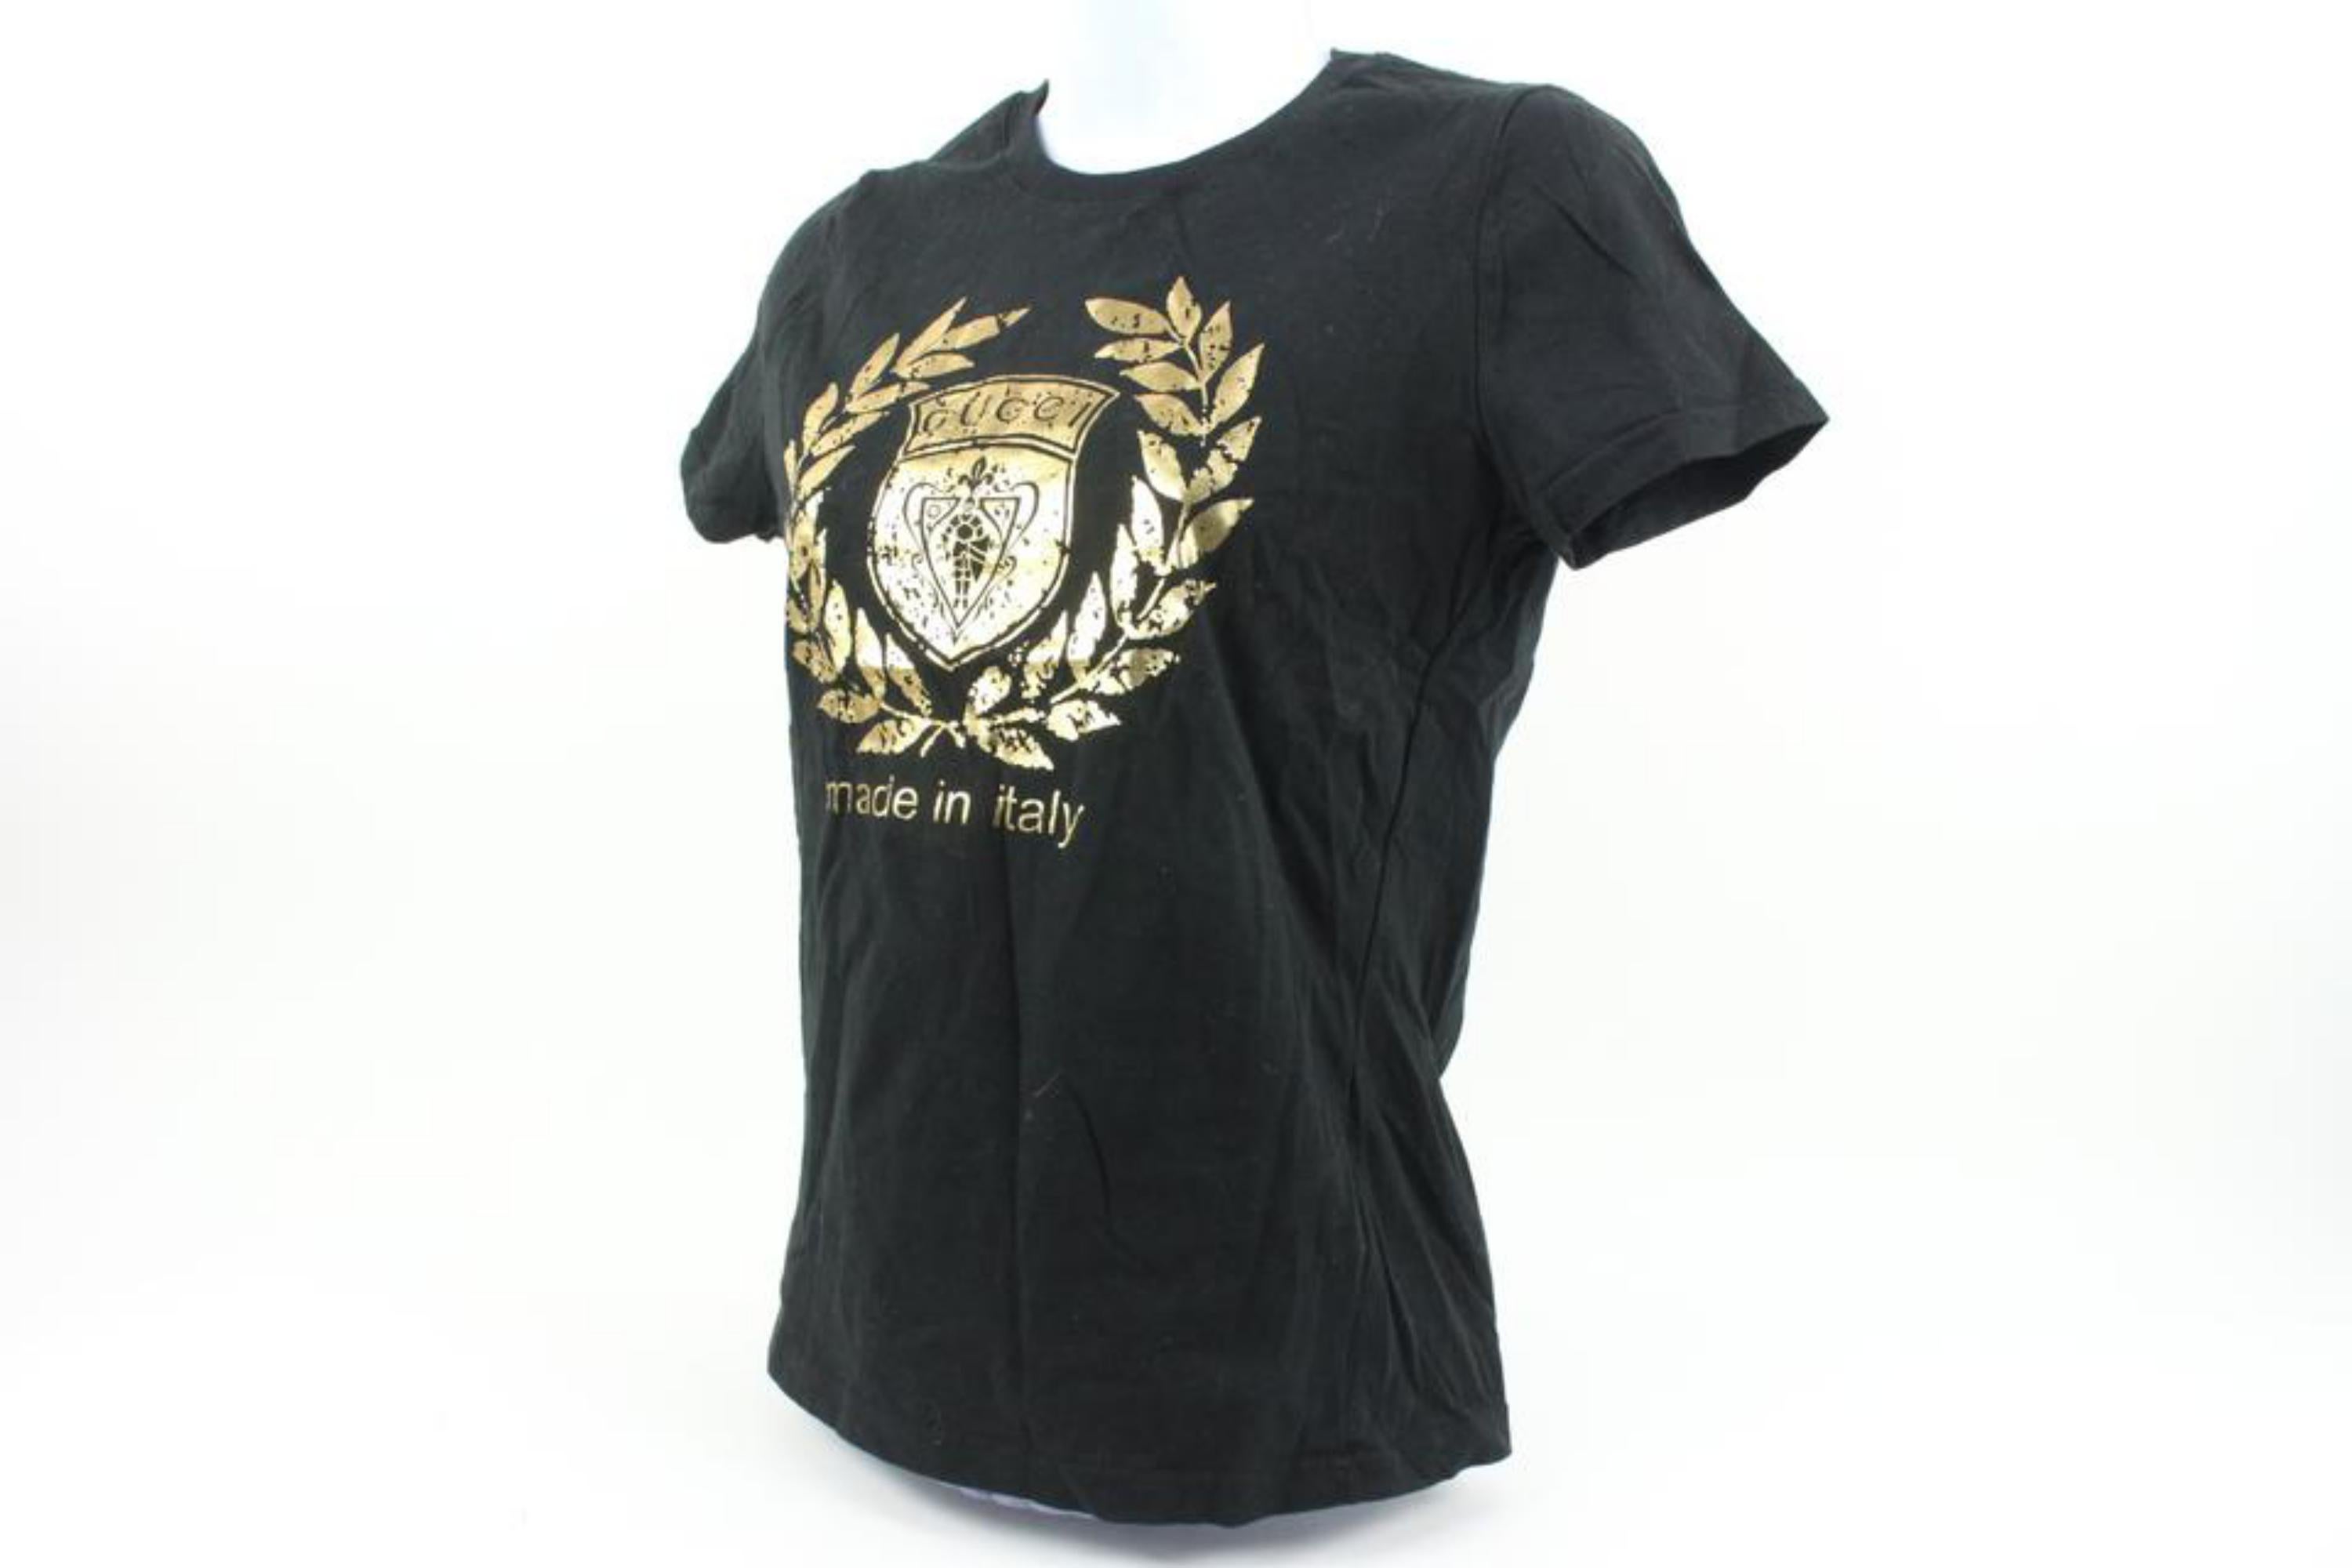 Gucci Women's XS Black x Gold Crest Logo T-Shirt Tee Shirt 120g28
Date Code/Serial Number: EABB 2008 01339
Made In: Italy
Measurements: Length:  16.5